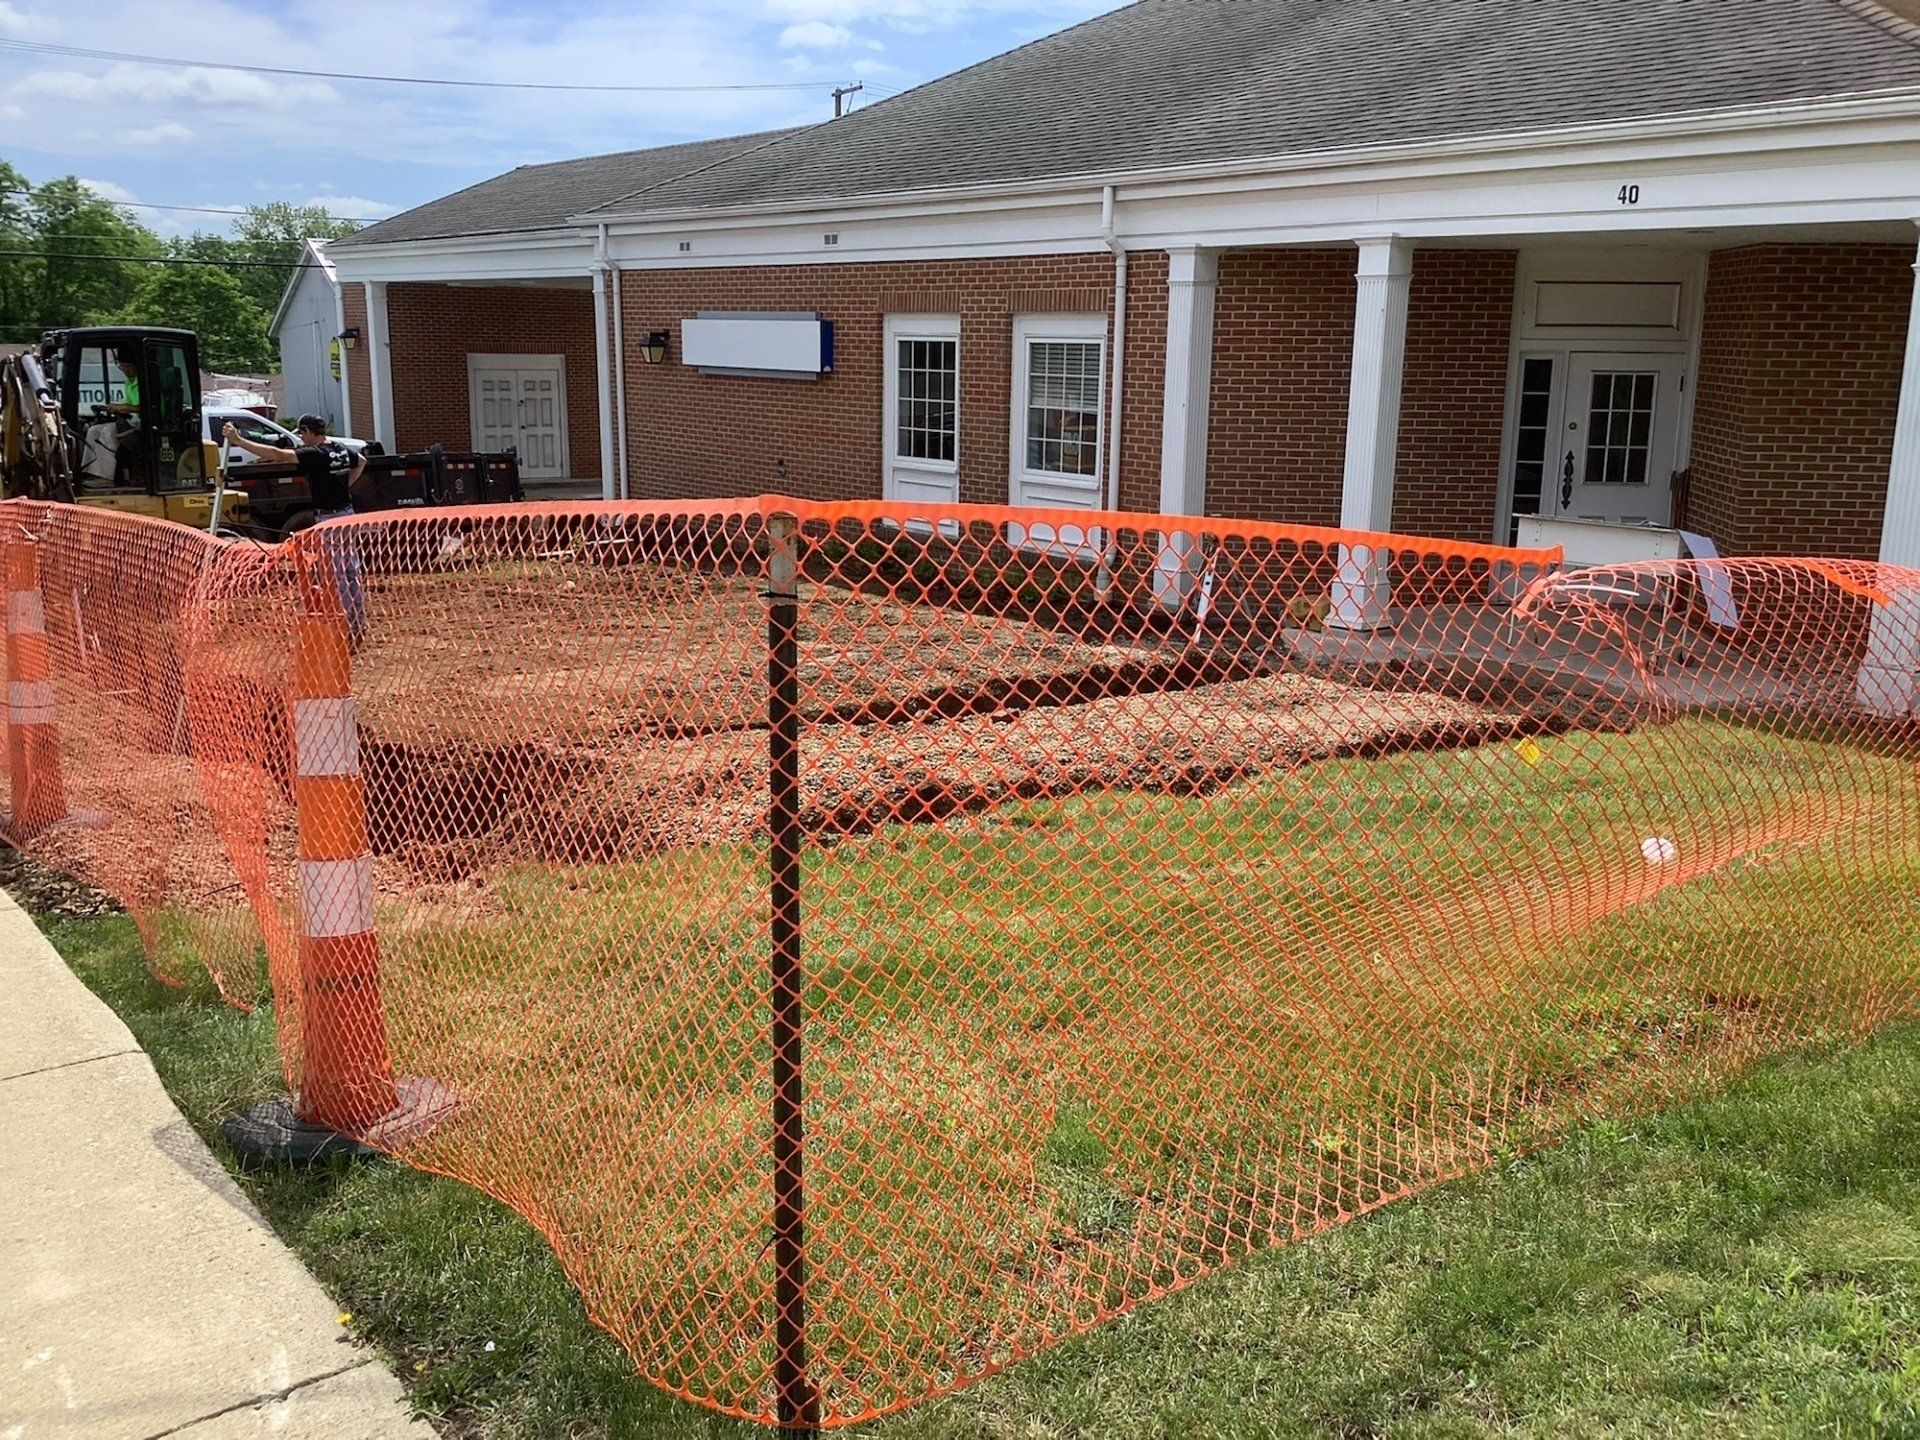 The front yard of the building is surrounded by an orange fence.